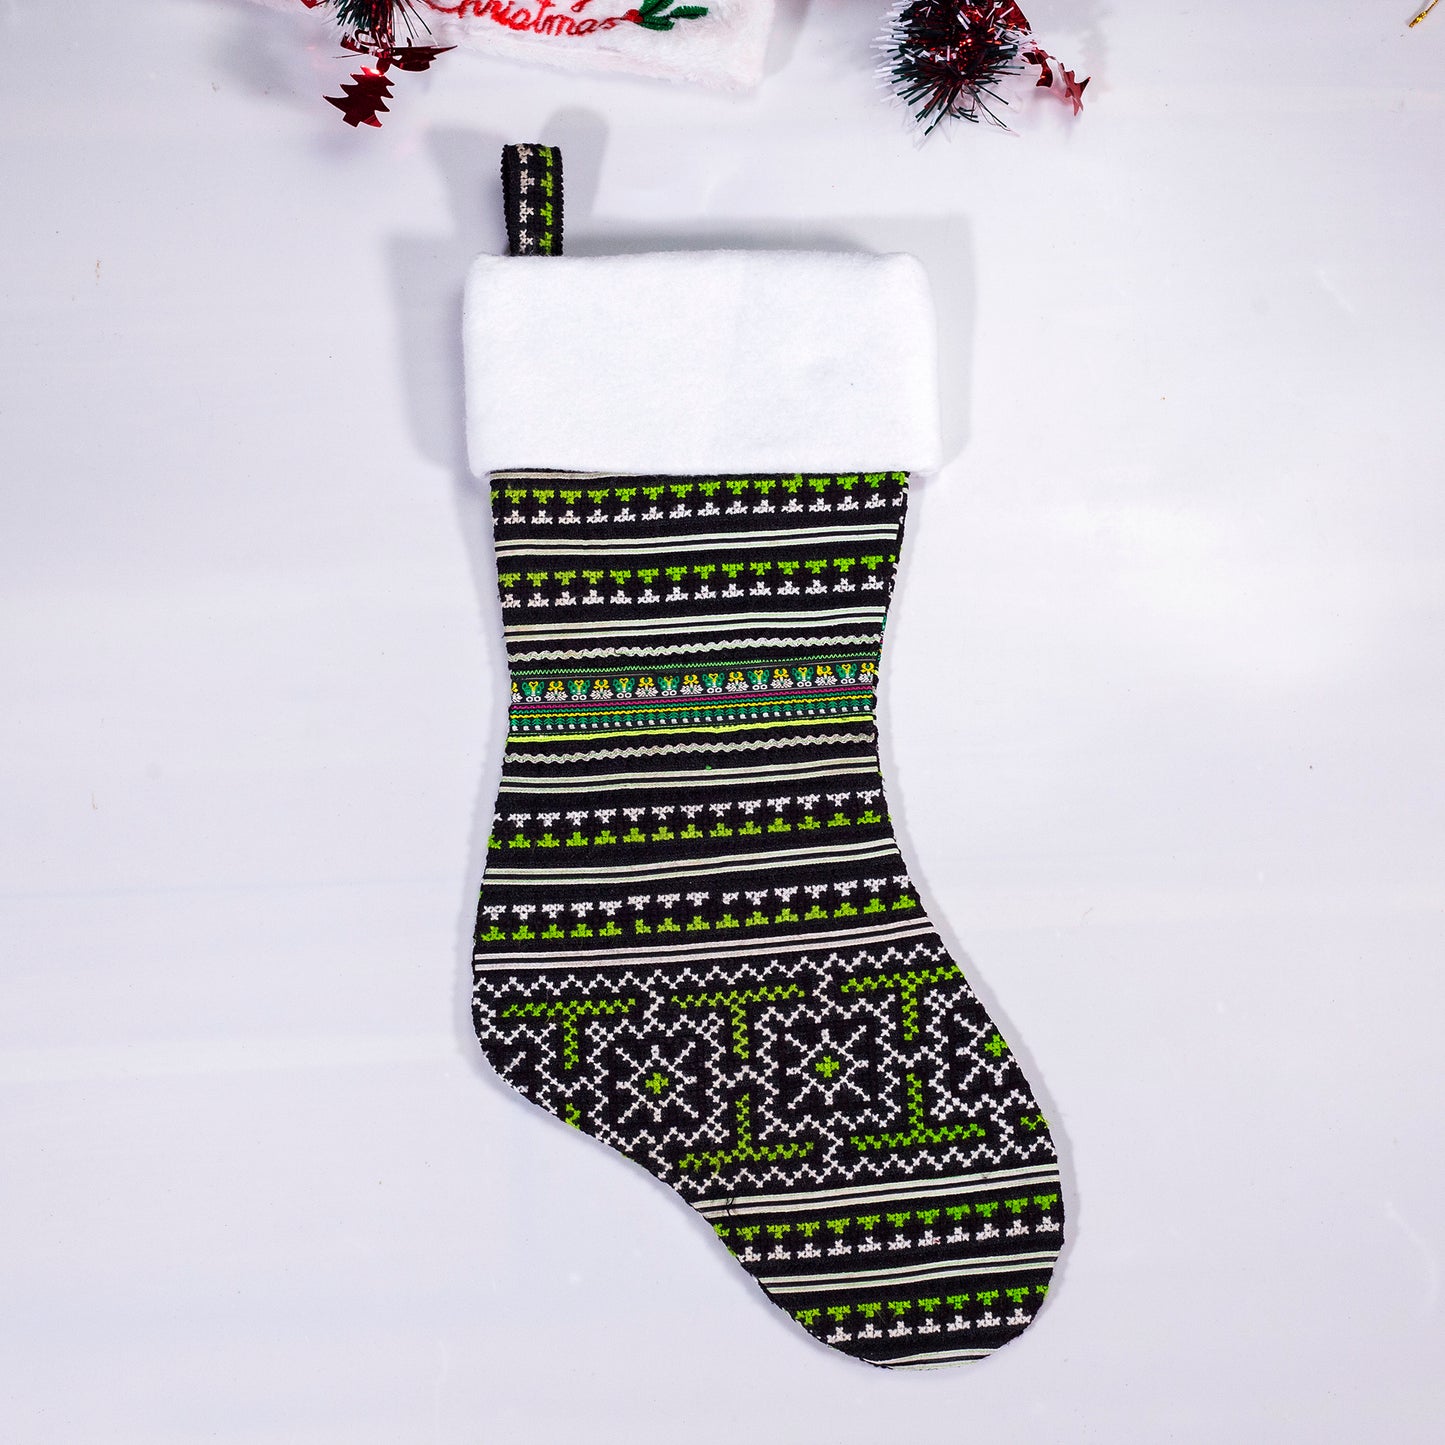 Christmas Stockings - Black and Green embroidery